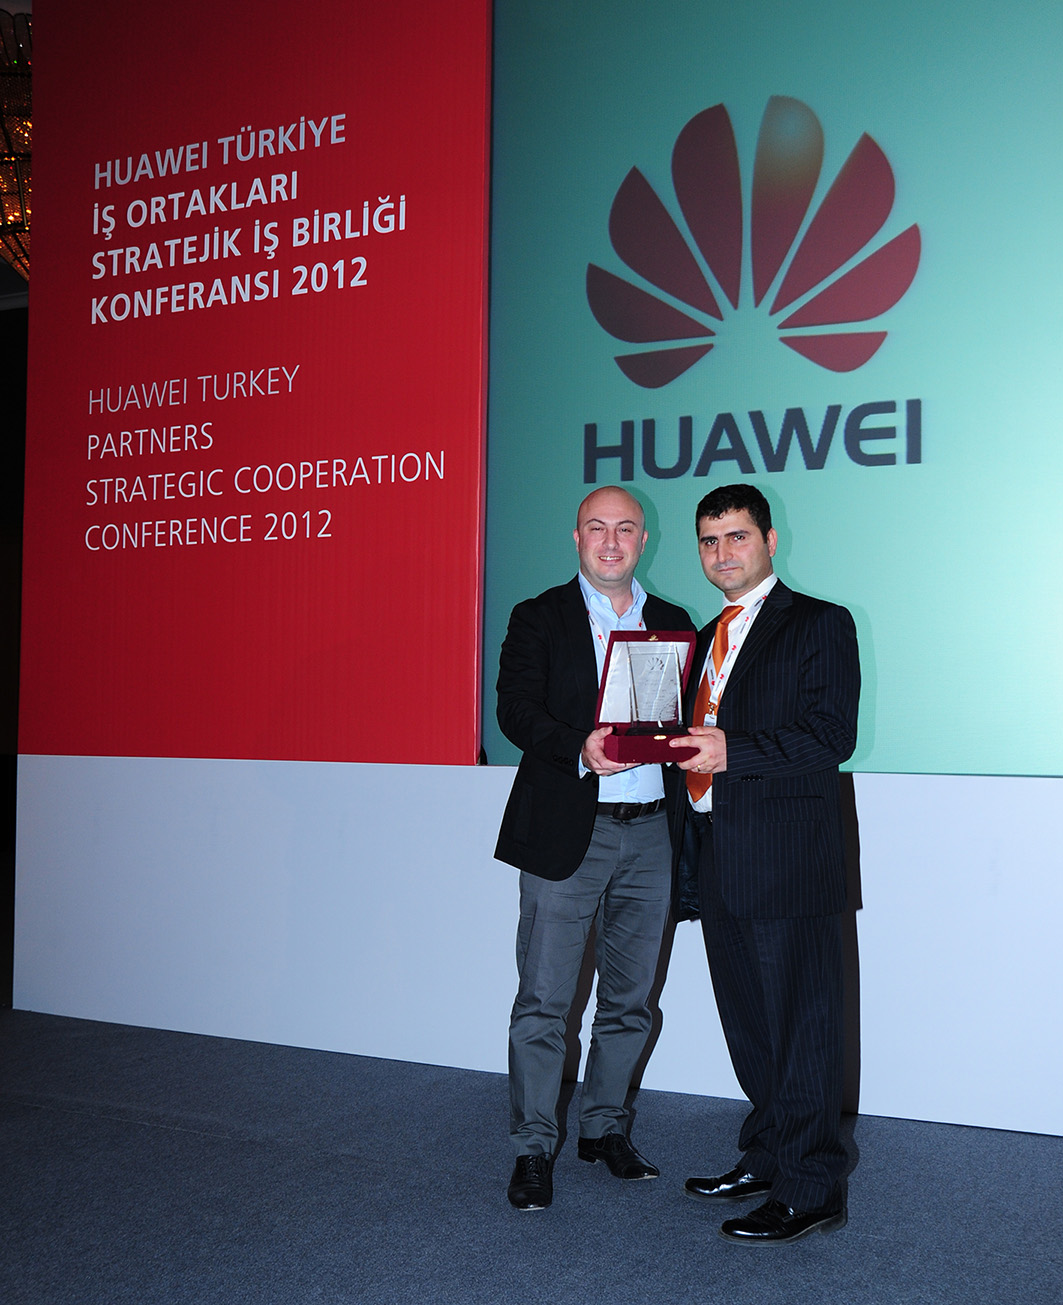 The best business partner Huawei